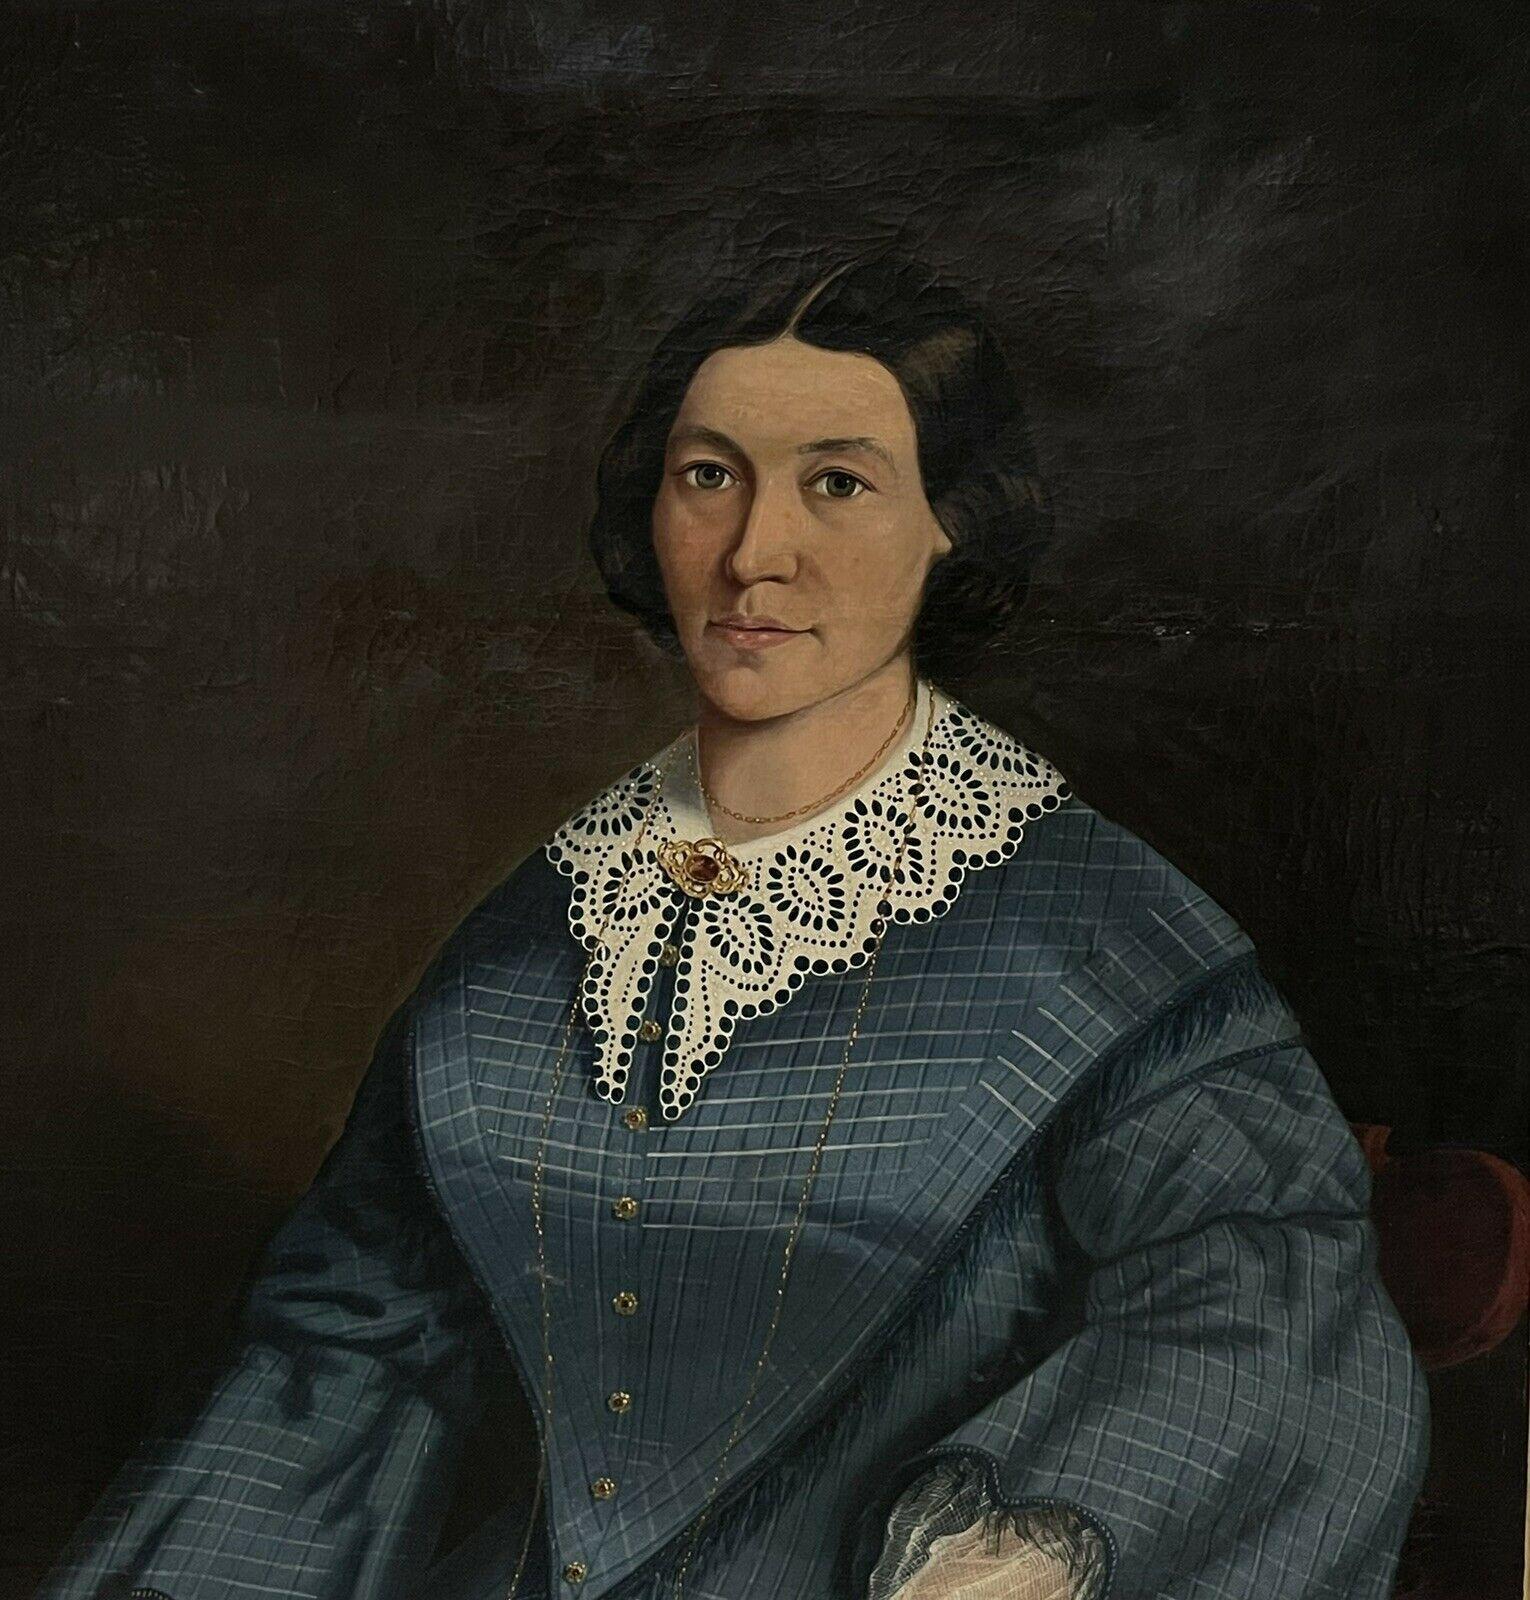 Artist/ School: American School, 19th century

Title: Portrait of a Seated Lady

Medium: oil painting on canvas, unframed

canvas: 38 x 30 inches

Provenance: private collection, UK

Condition: The painting is in overall very good and sound